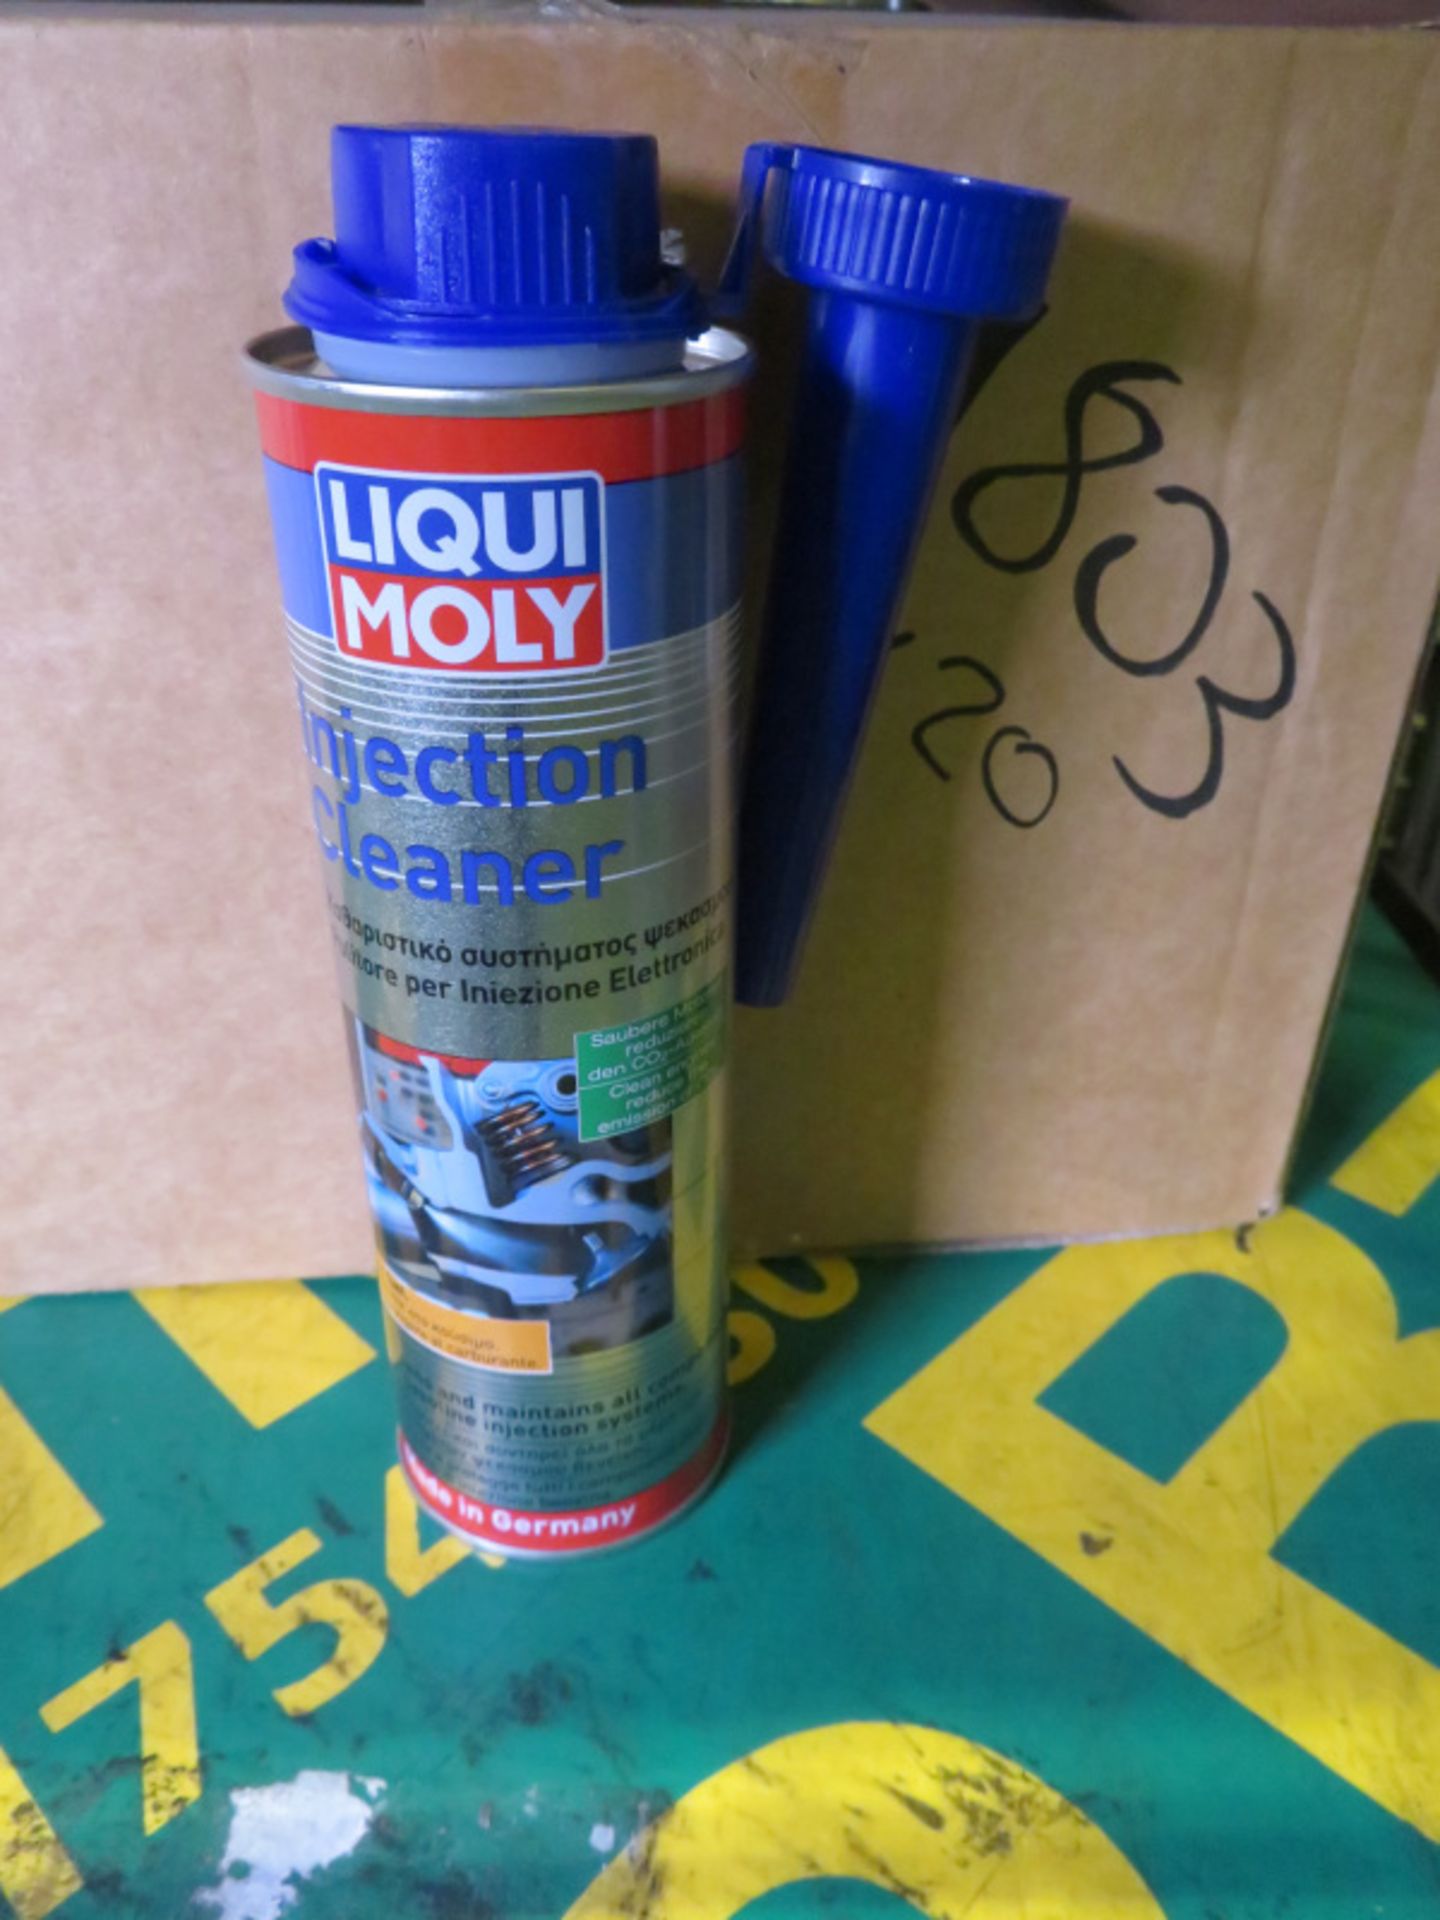 Liqui Moly fuel injection cleaner, Liqui Moly engine flush plus, Liqui Moly injection cleaner - Image 6 of 7